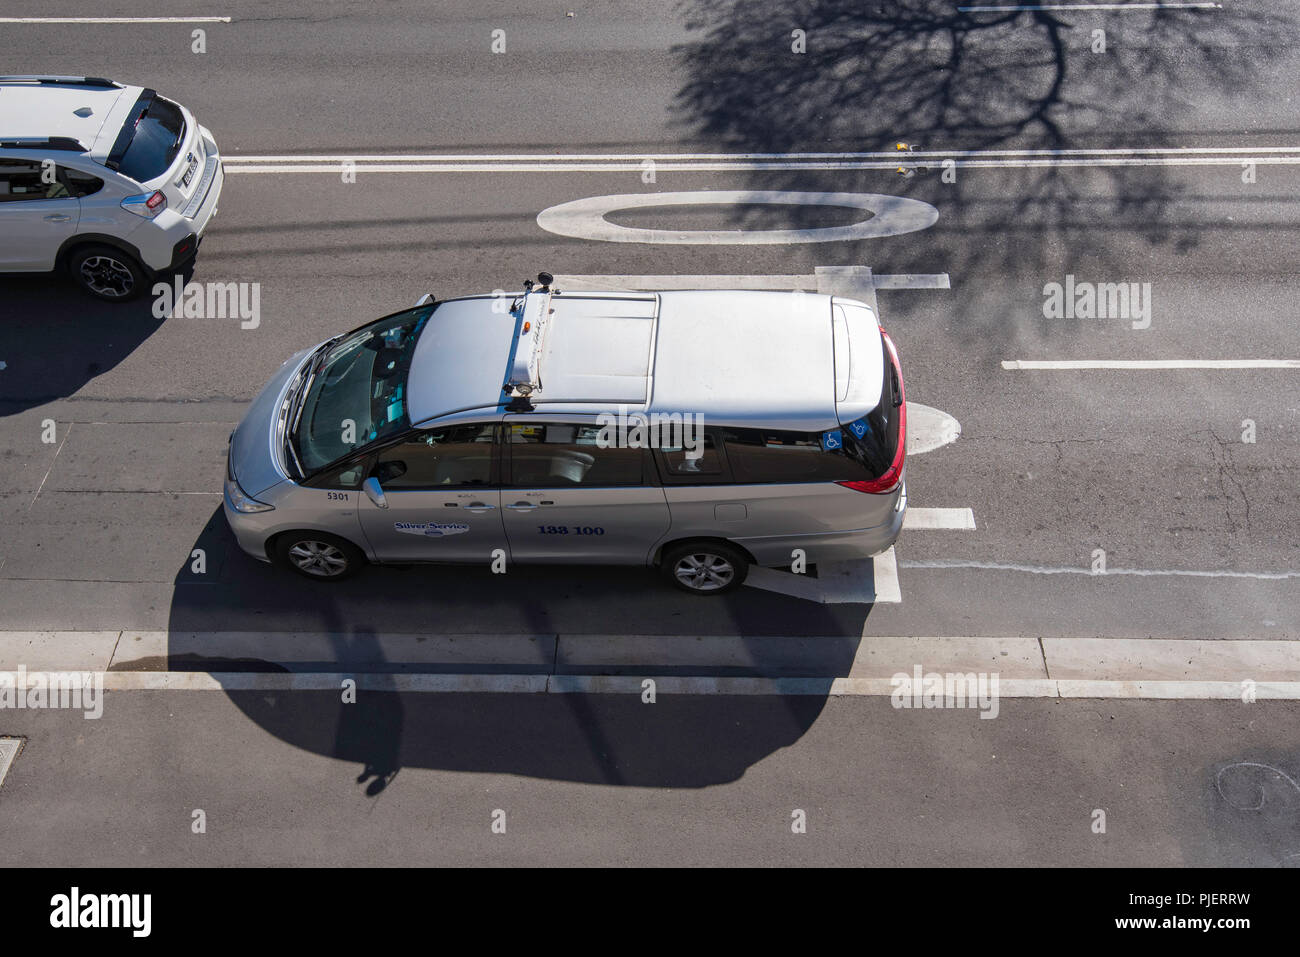 A Sydney Maxi Cab or larger taxi taken from above, driving in a 40km per hour zone Stock Photo